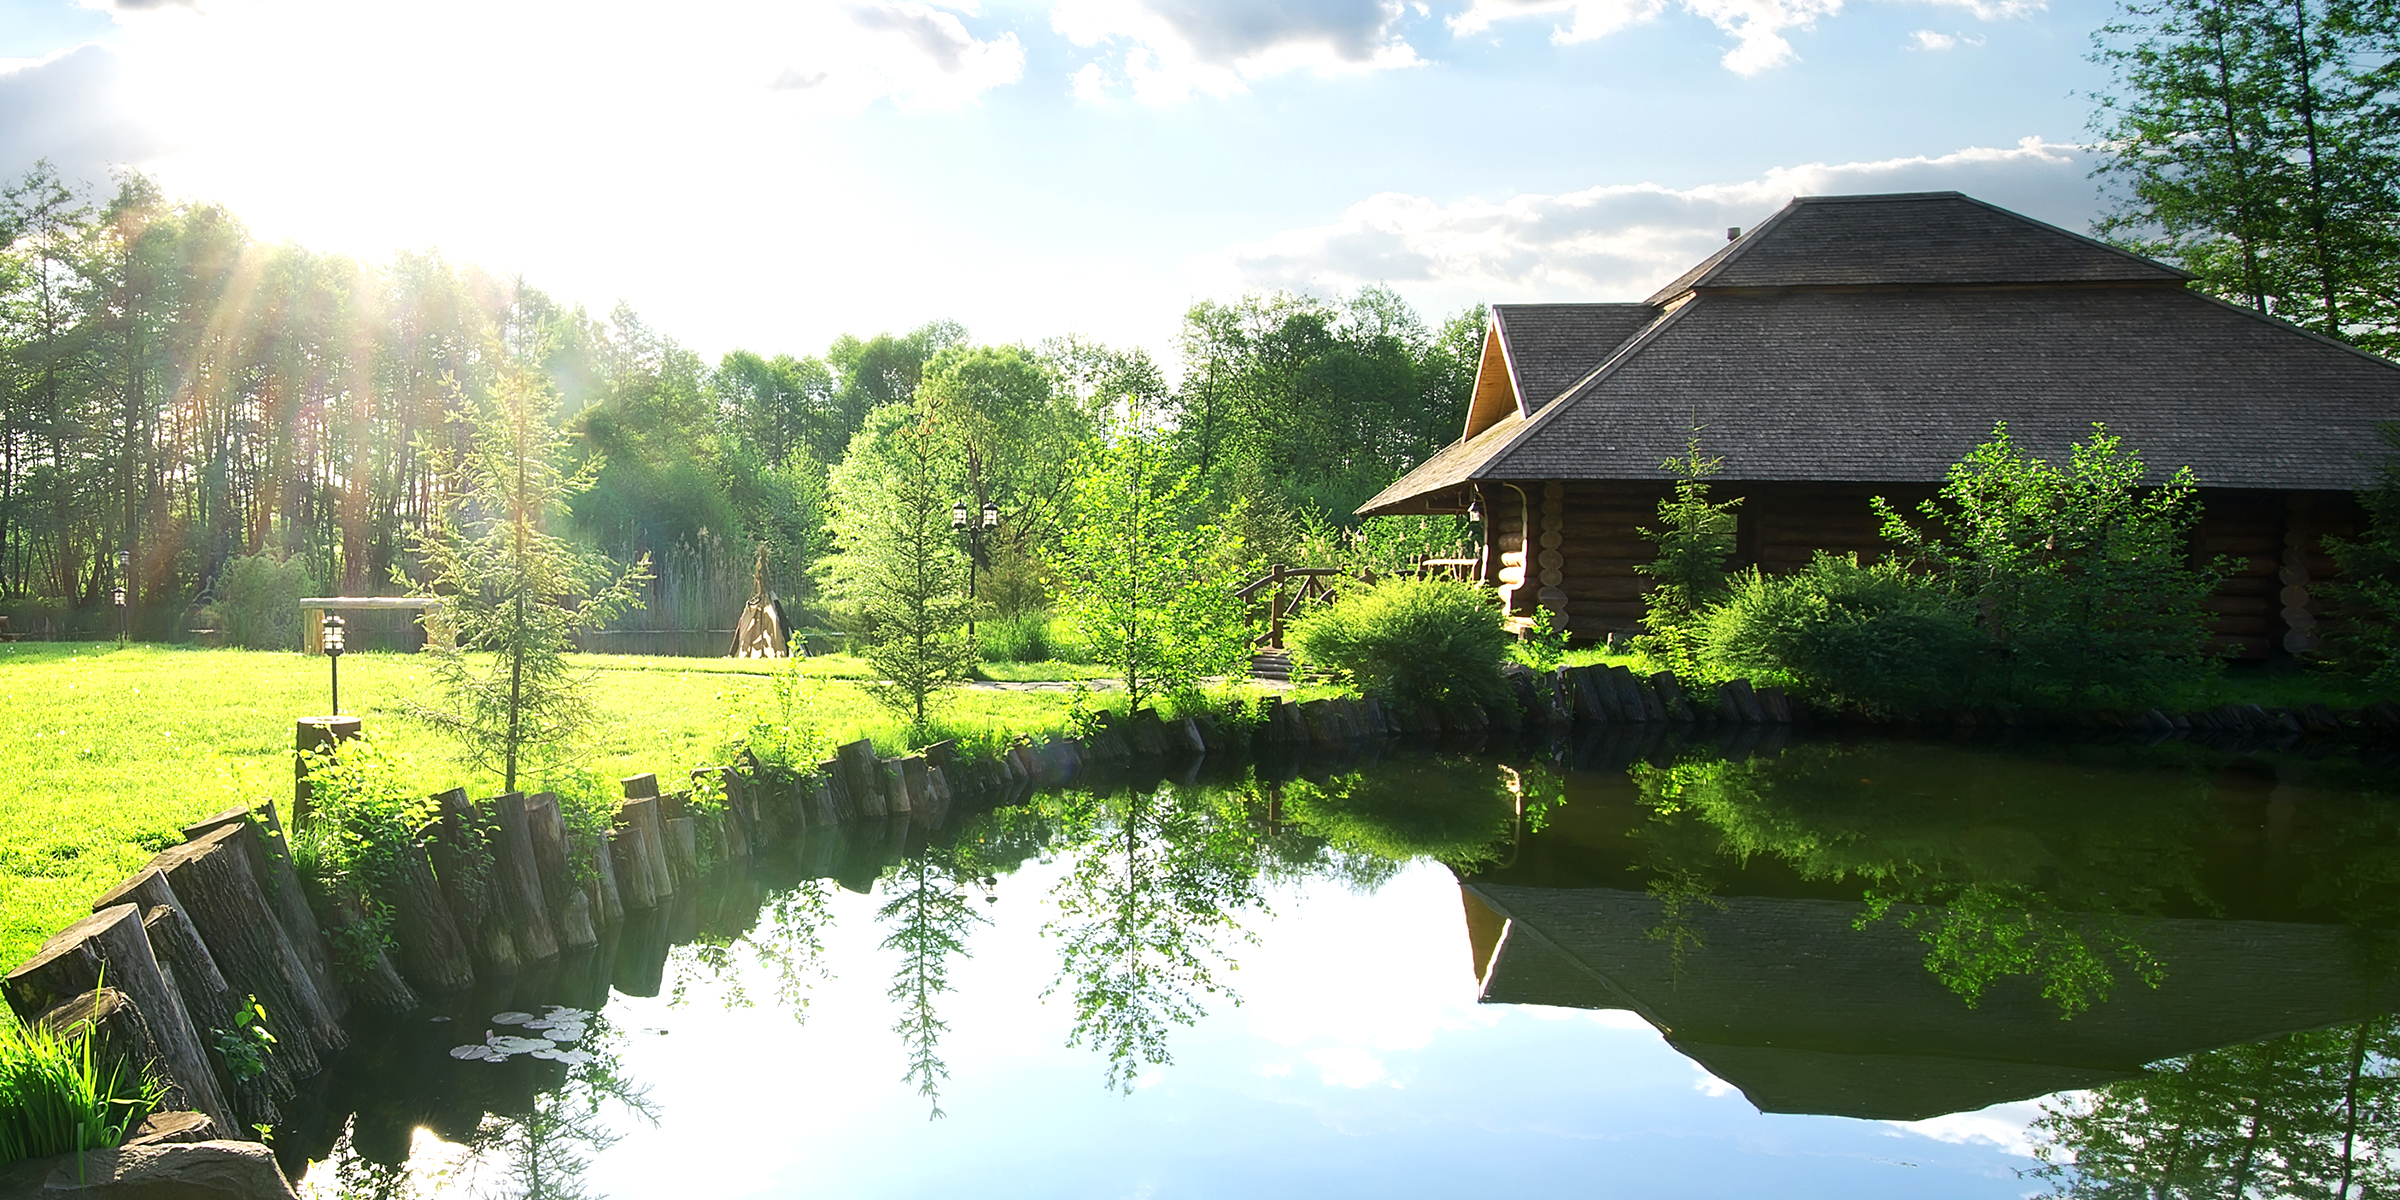 A house with a pond | Source: Shutterstock